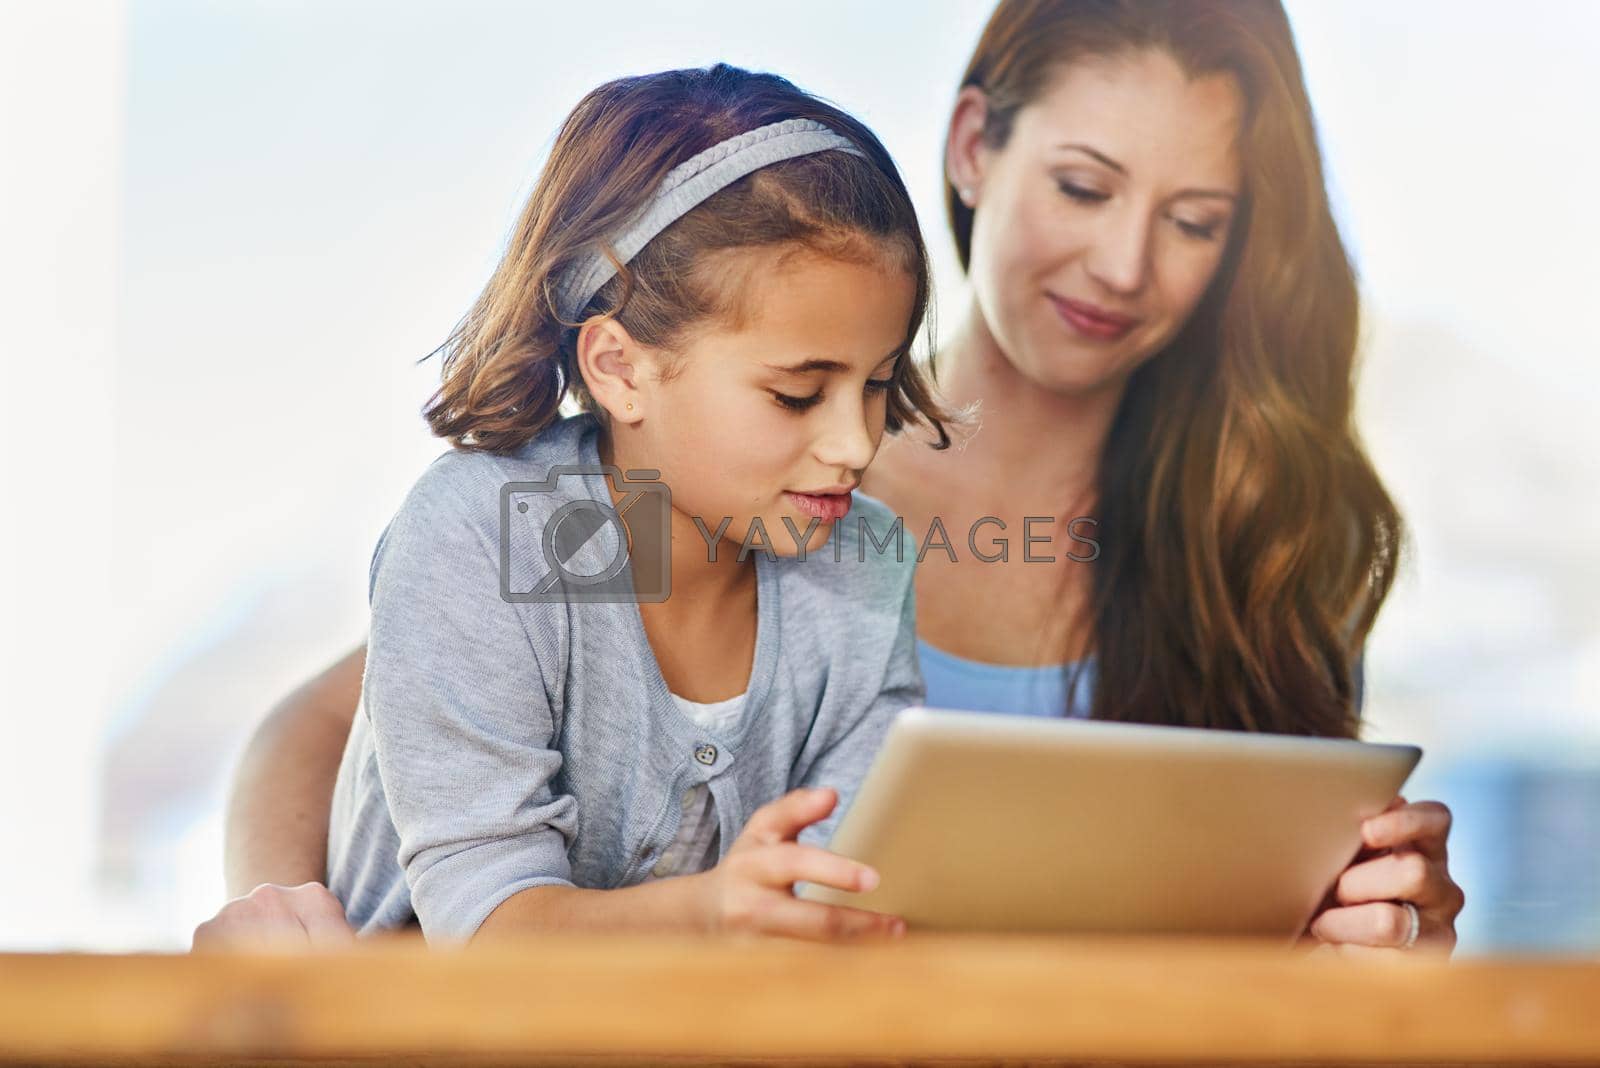 Cropped shot of a mother and her daughter using a digital tablet.